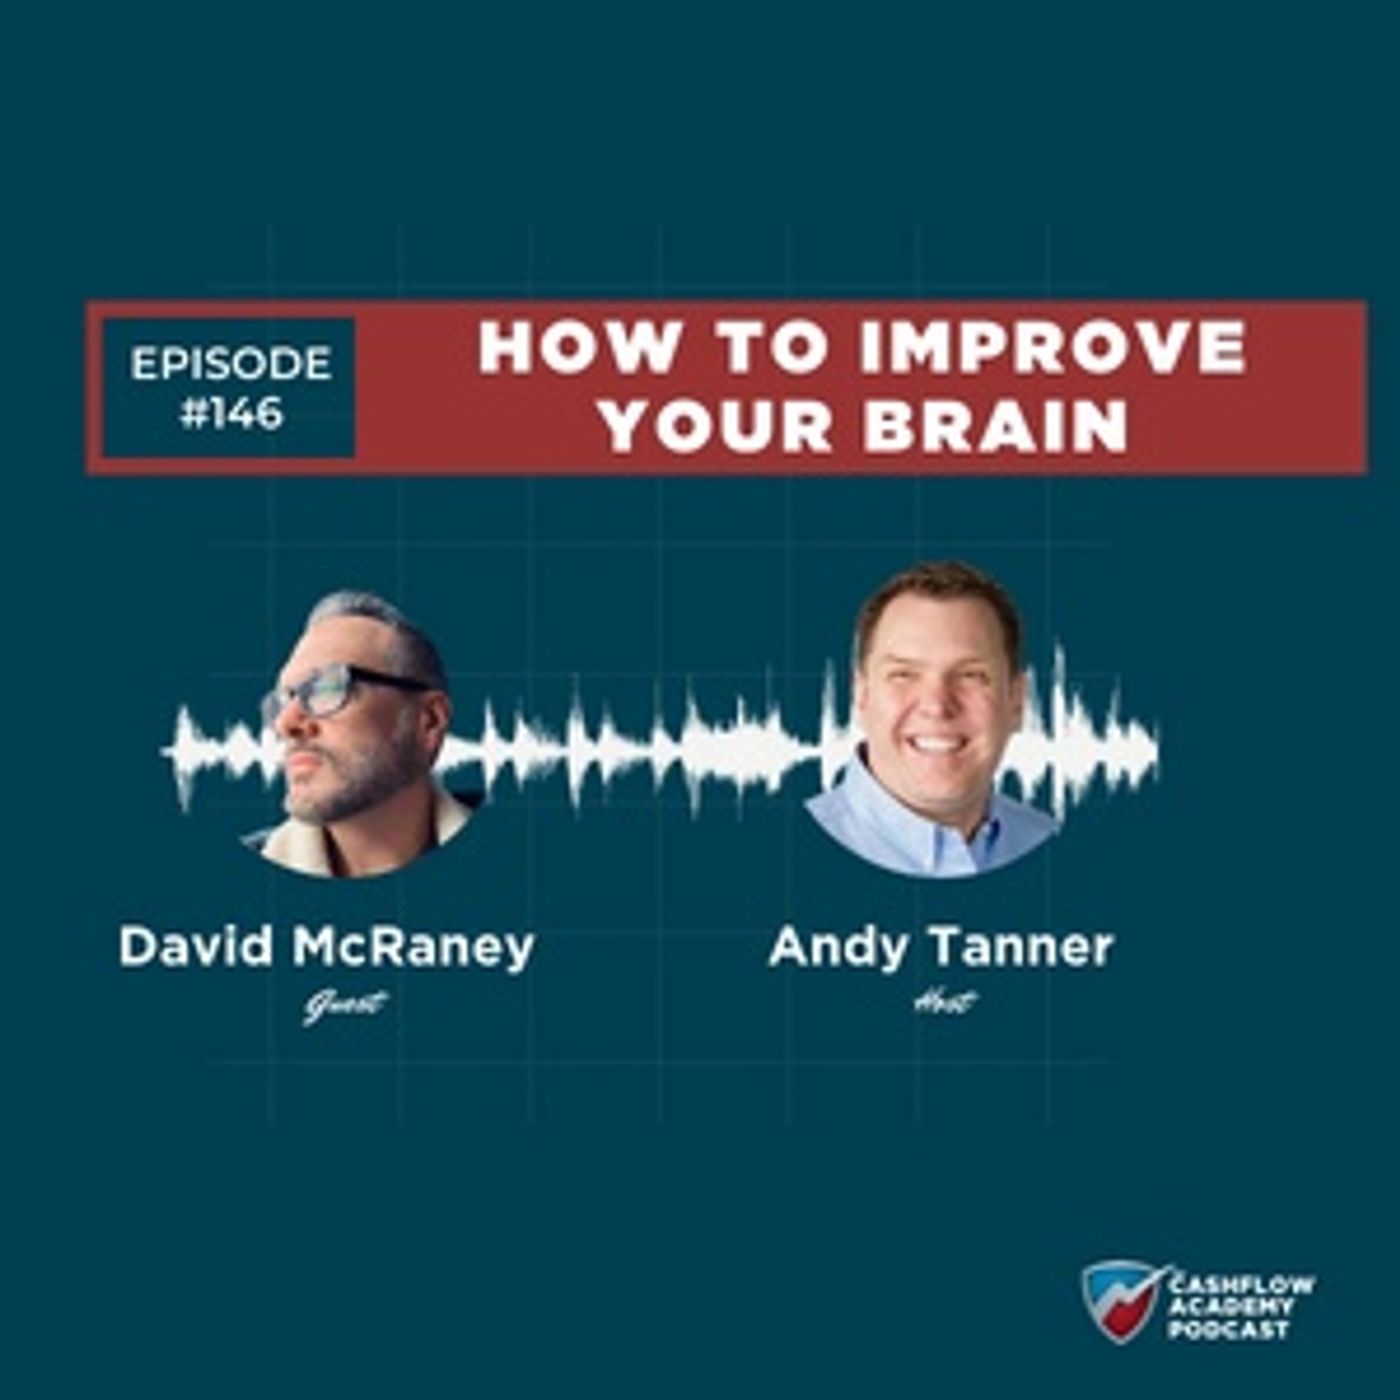 How To Improve Your Brain